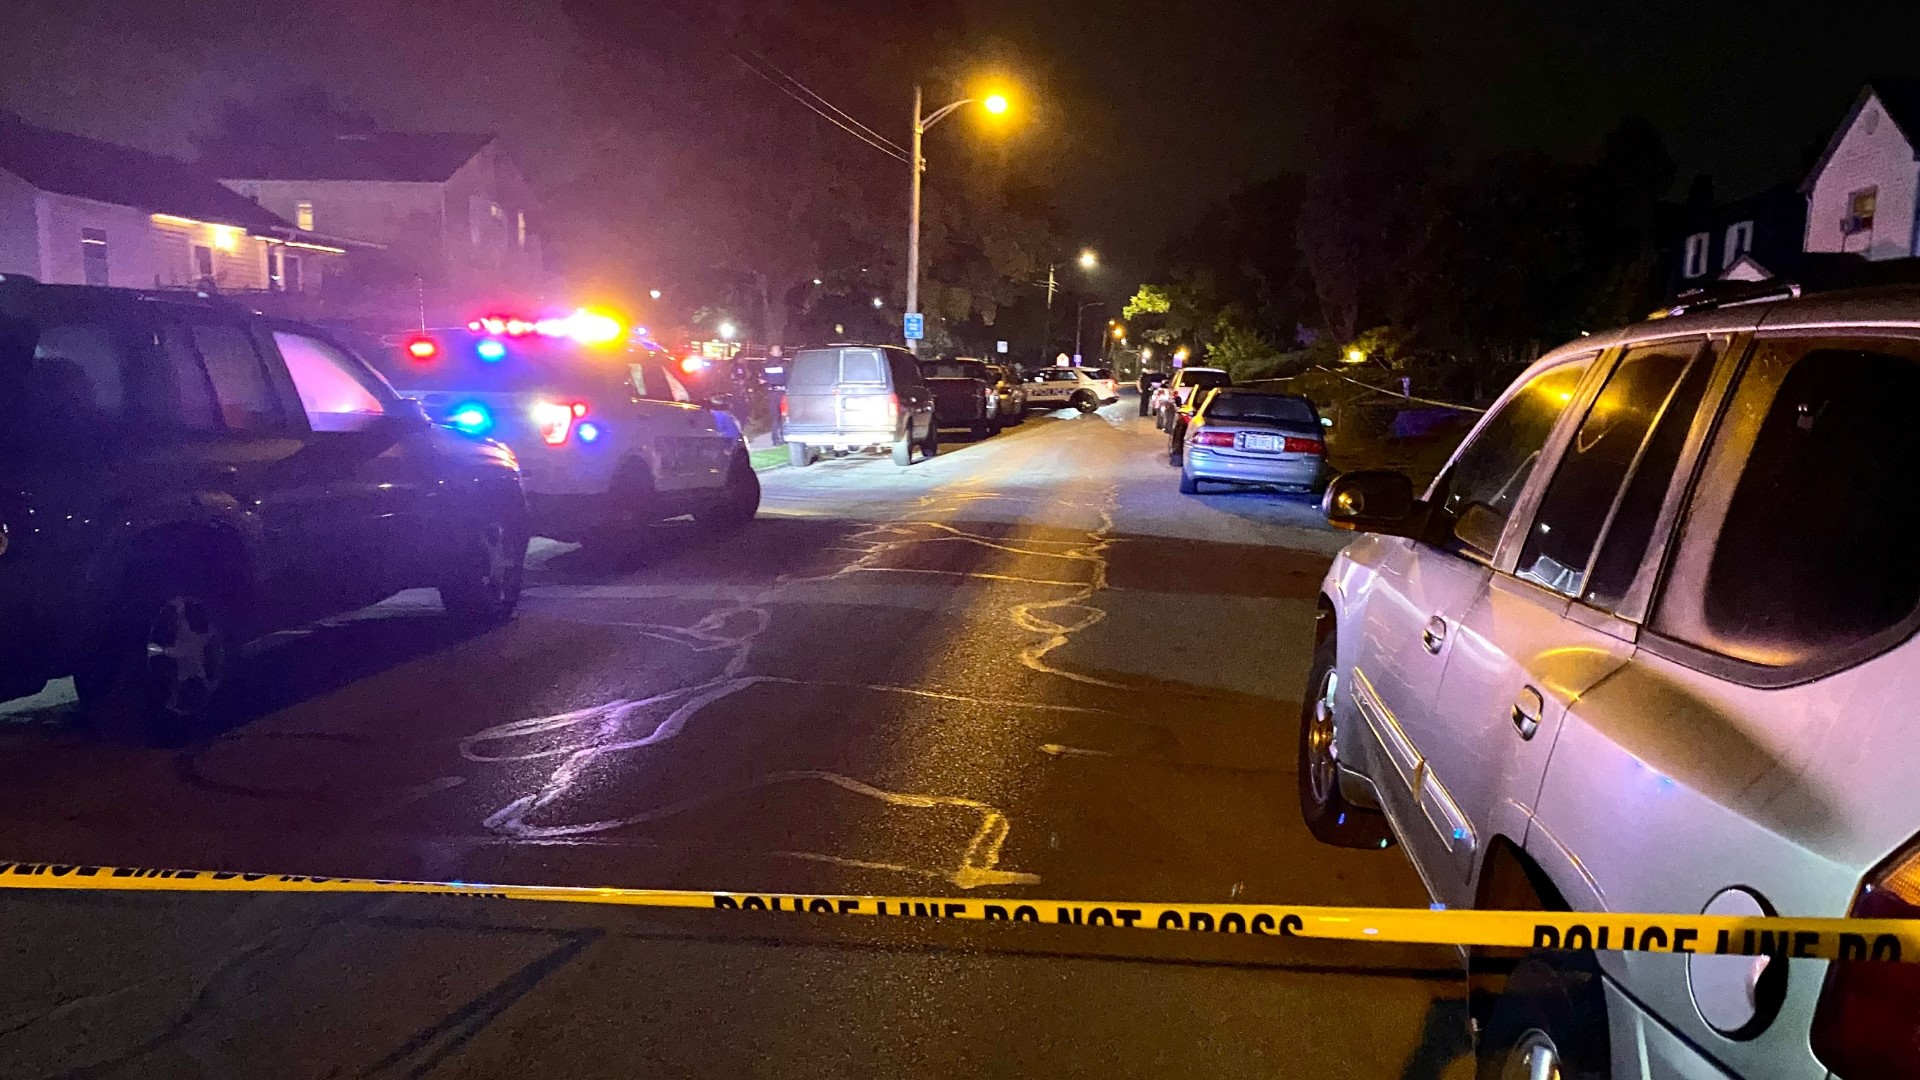 One person, along with cars and houses, was shot during a southwest Columbus shooting Friday morning.